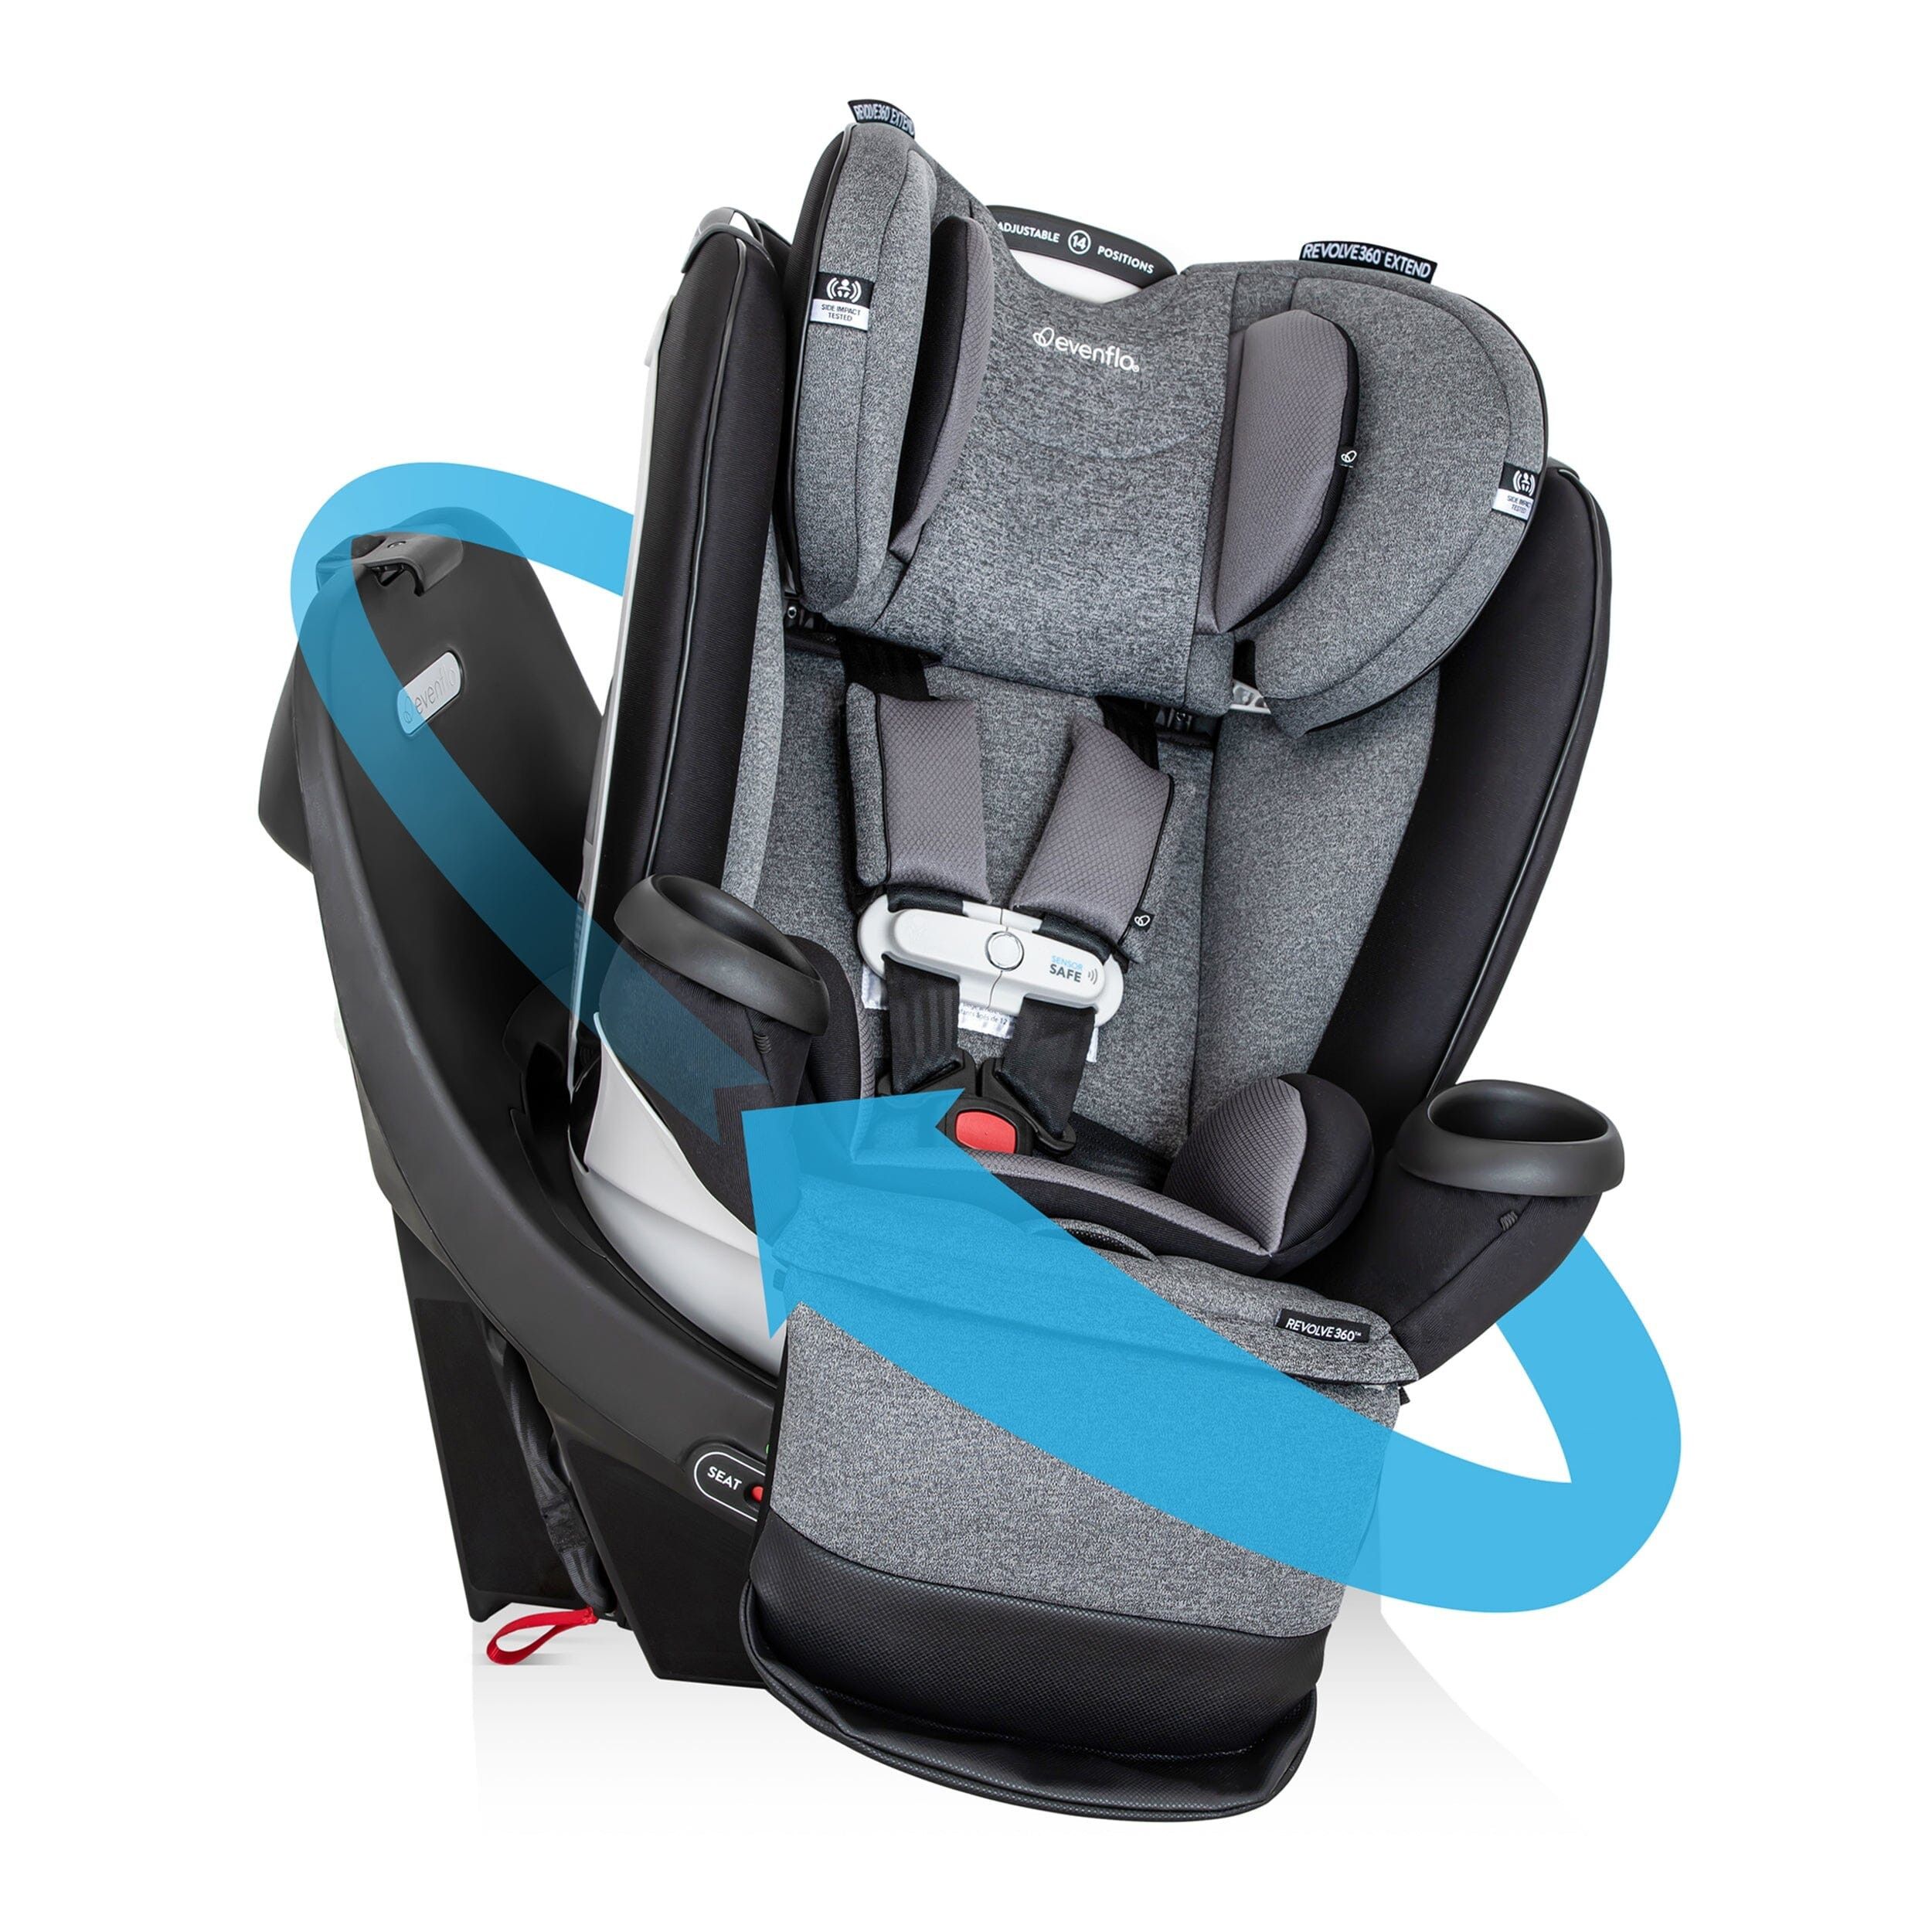 Evenflo Revolve360 Extend All-in-One Rotational Car Seat with SensorSafe | Strolleria